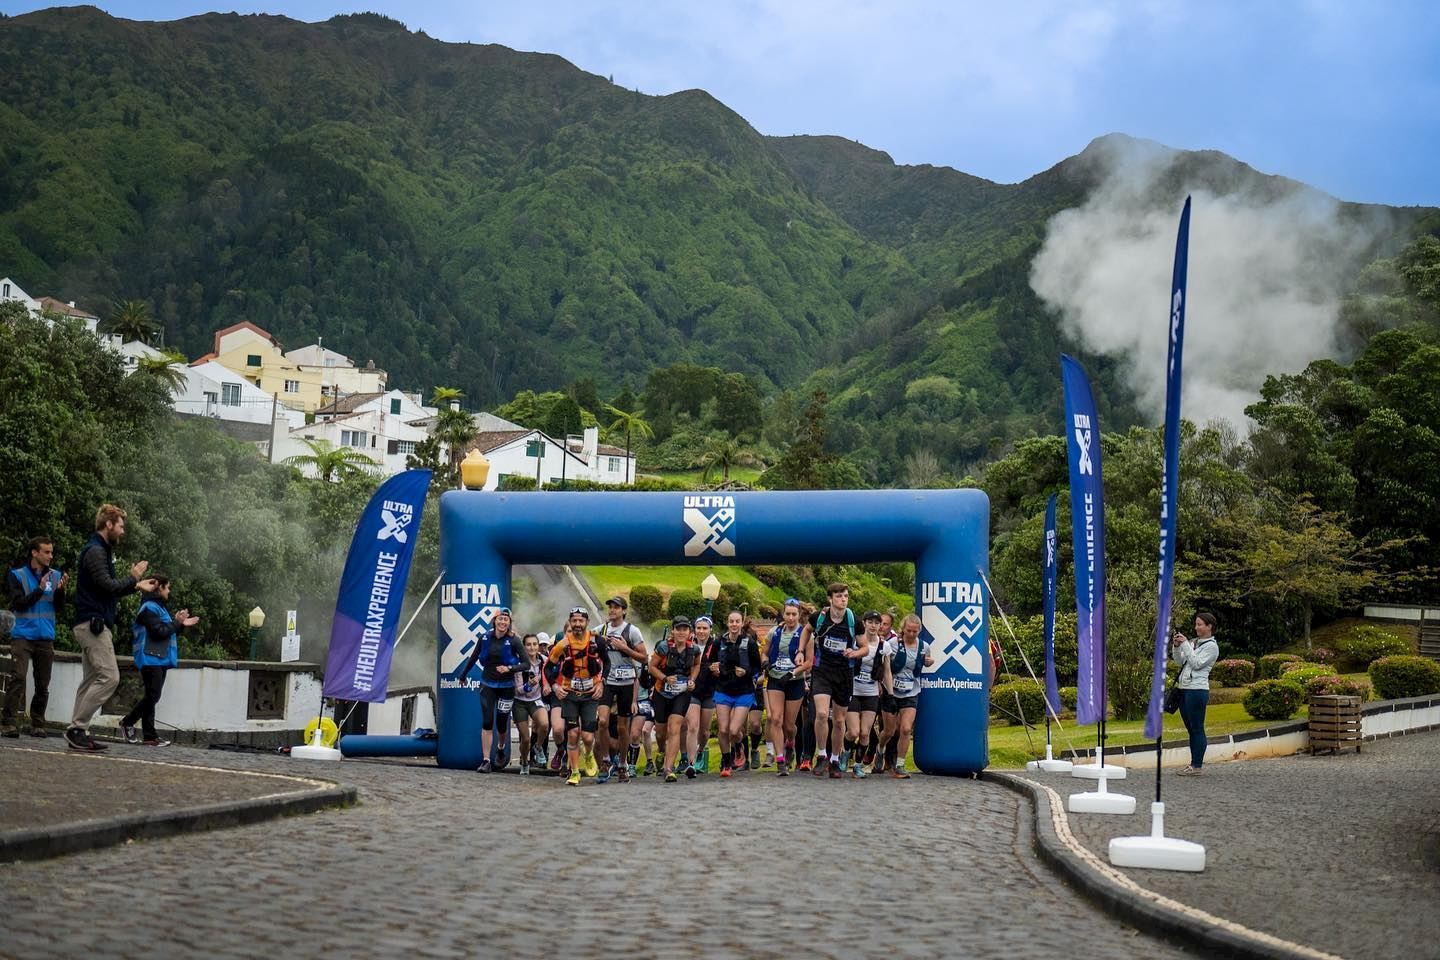 ultra x azores 125